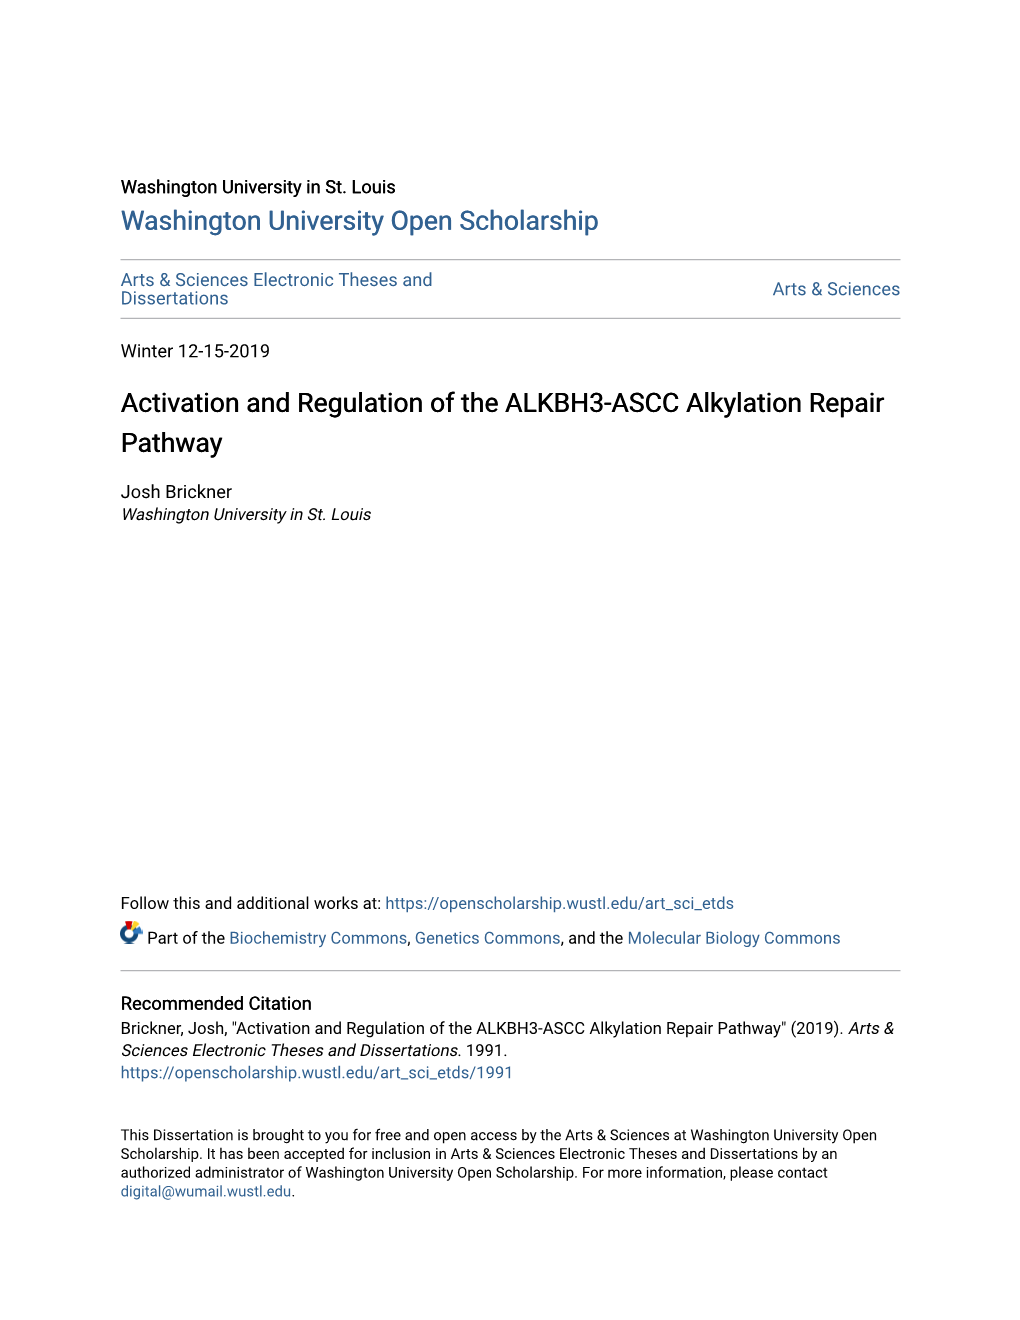 Activation and Regulation of the ALKBH3-ASCC Alkylation Repair Pathway